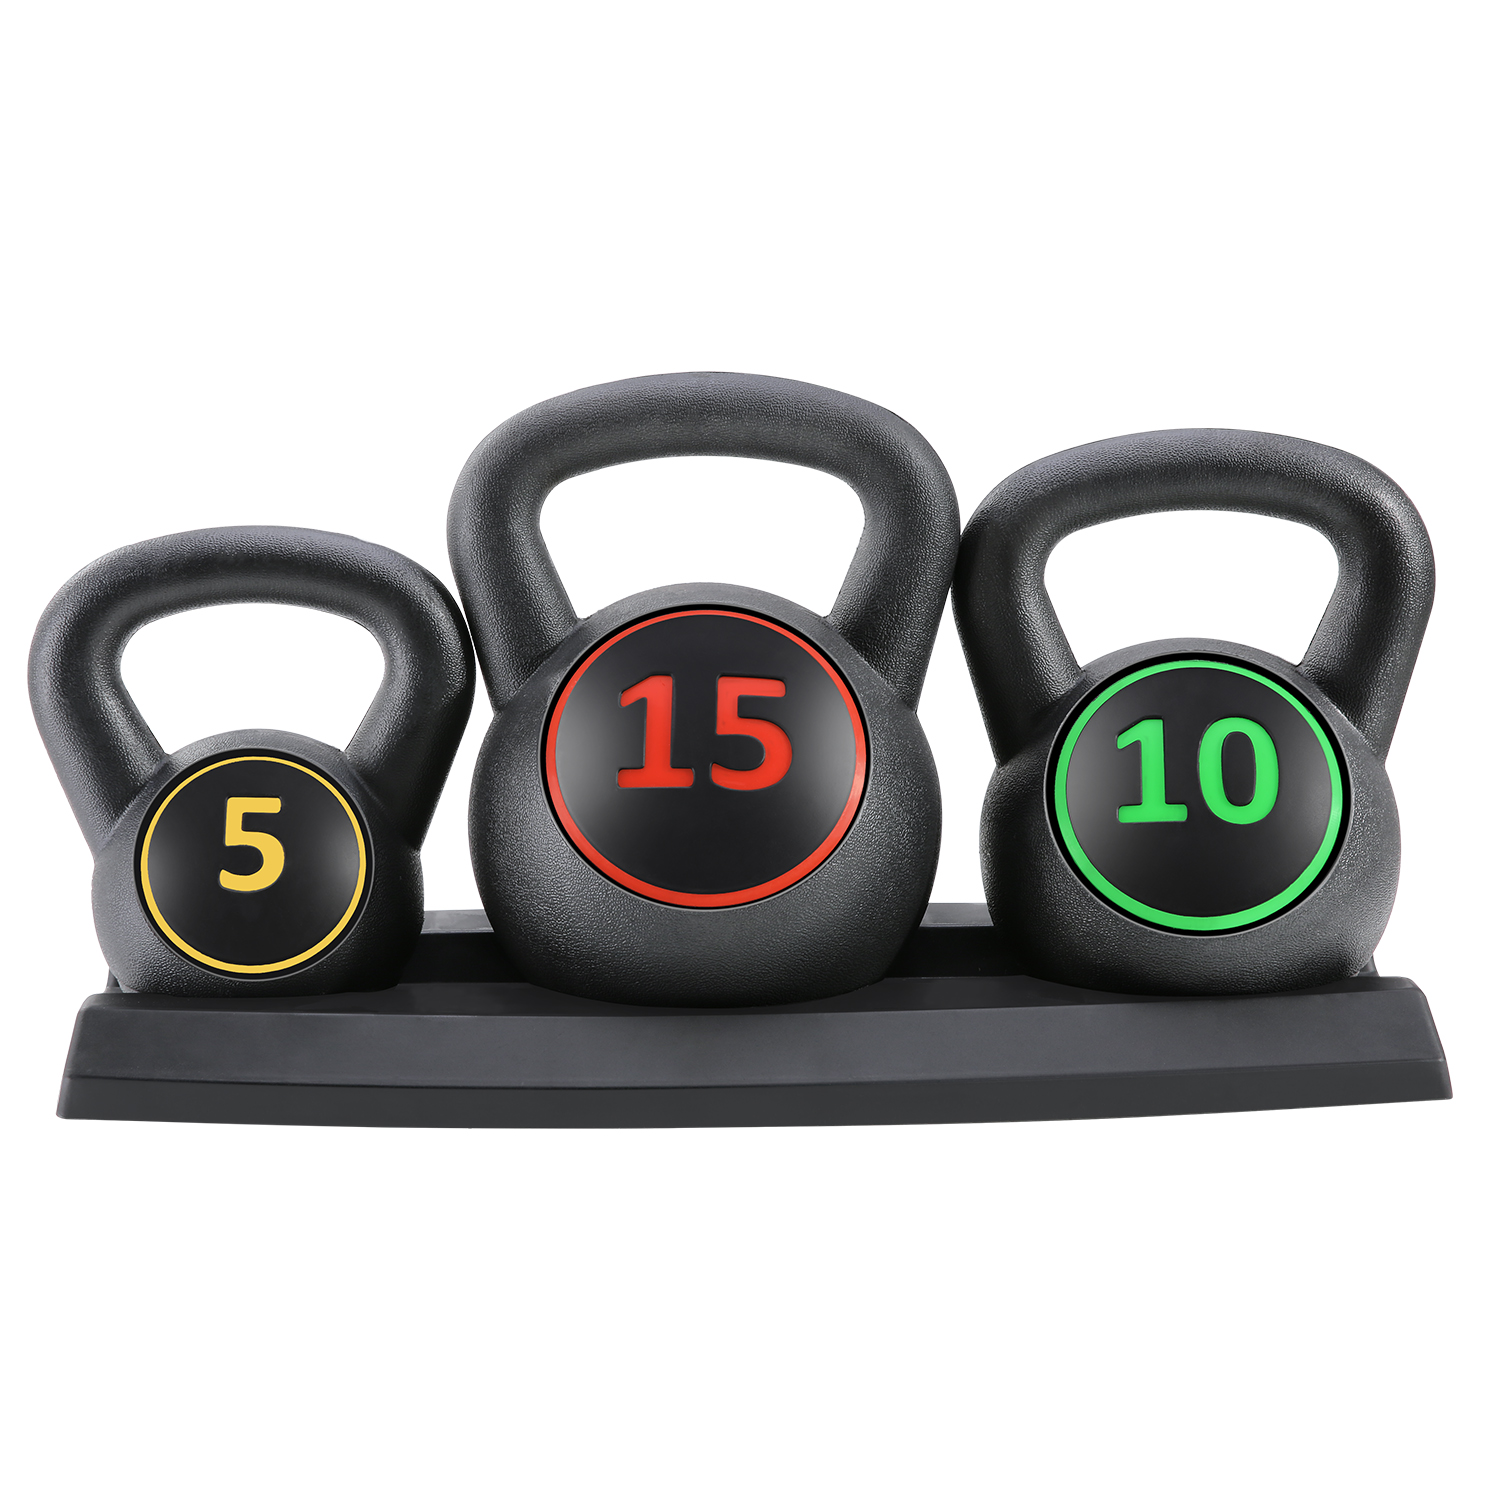 MaxKare Kettlebell Set 3-Piece Wide Handle HDPE Coated 5 Lb., 10 Lb., 15 Lb. Weights Kettlebells with Storage Exercise Fitness Rack - image 1 of 10